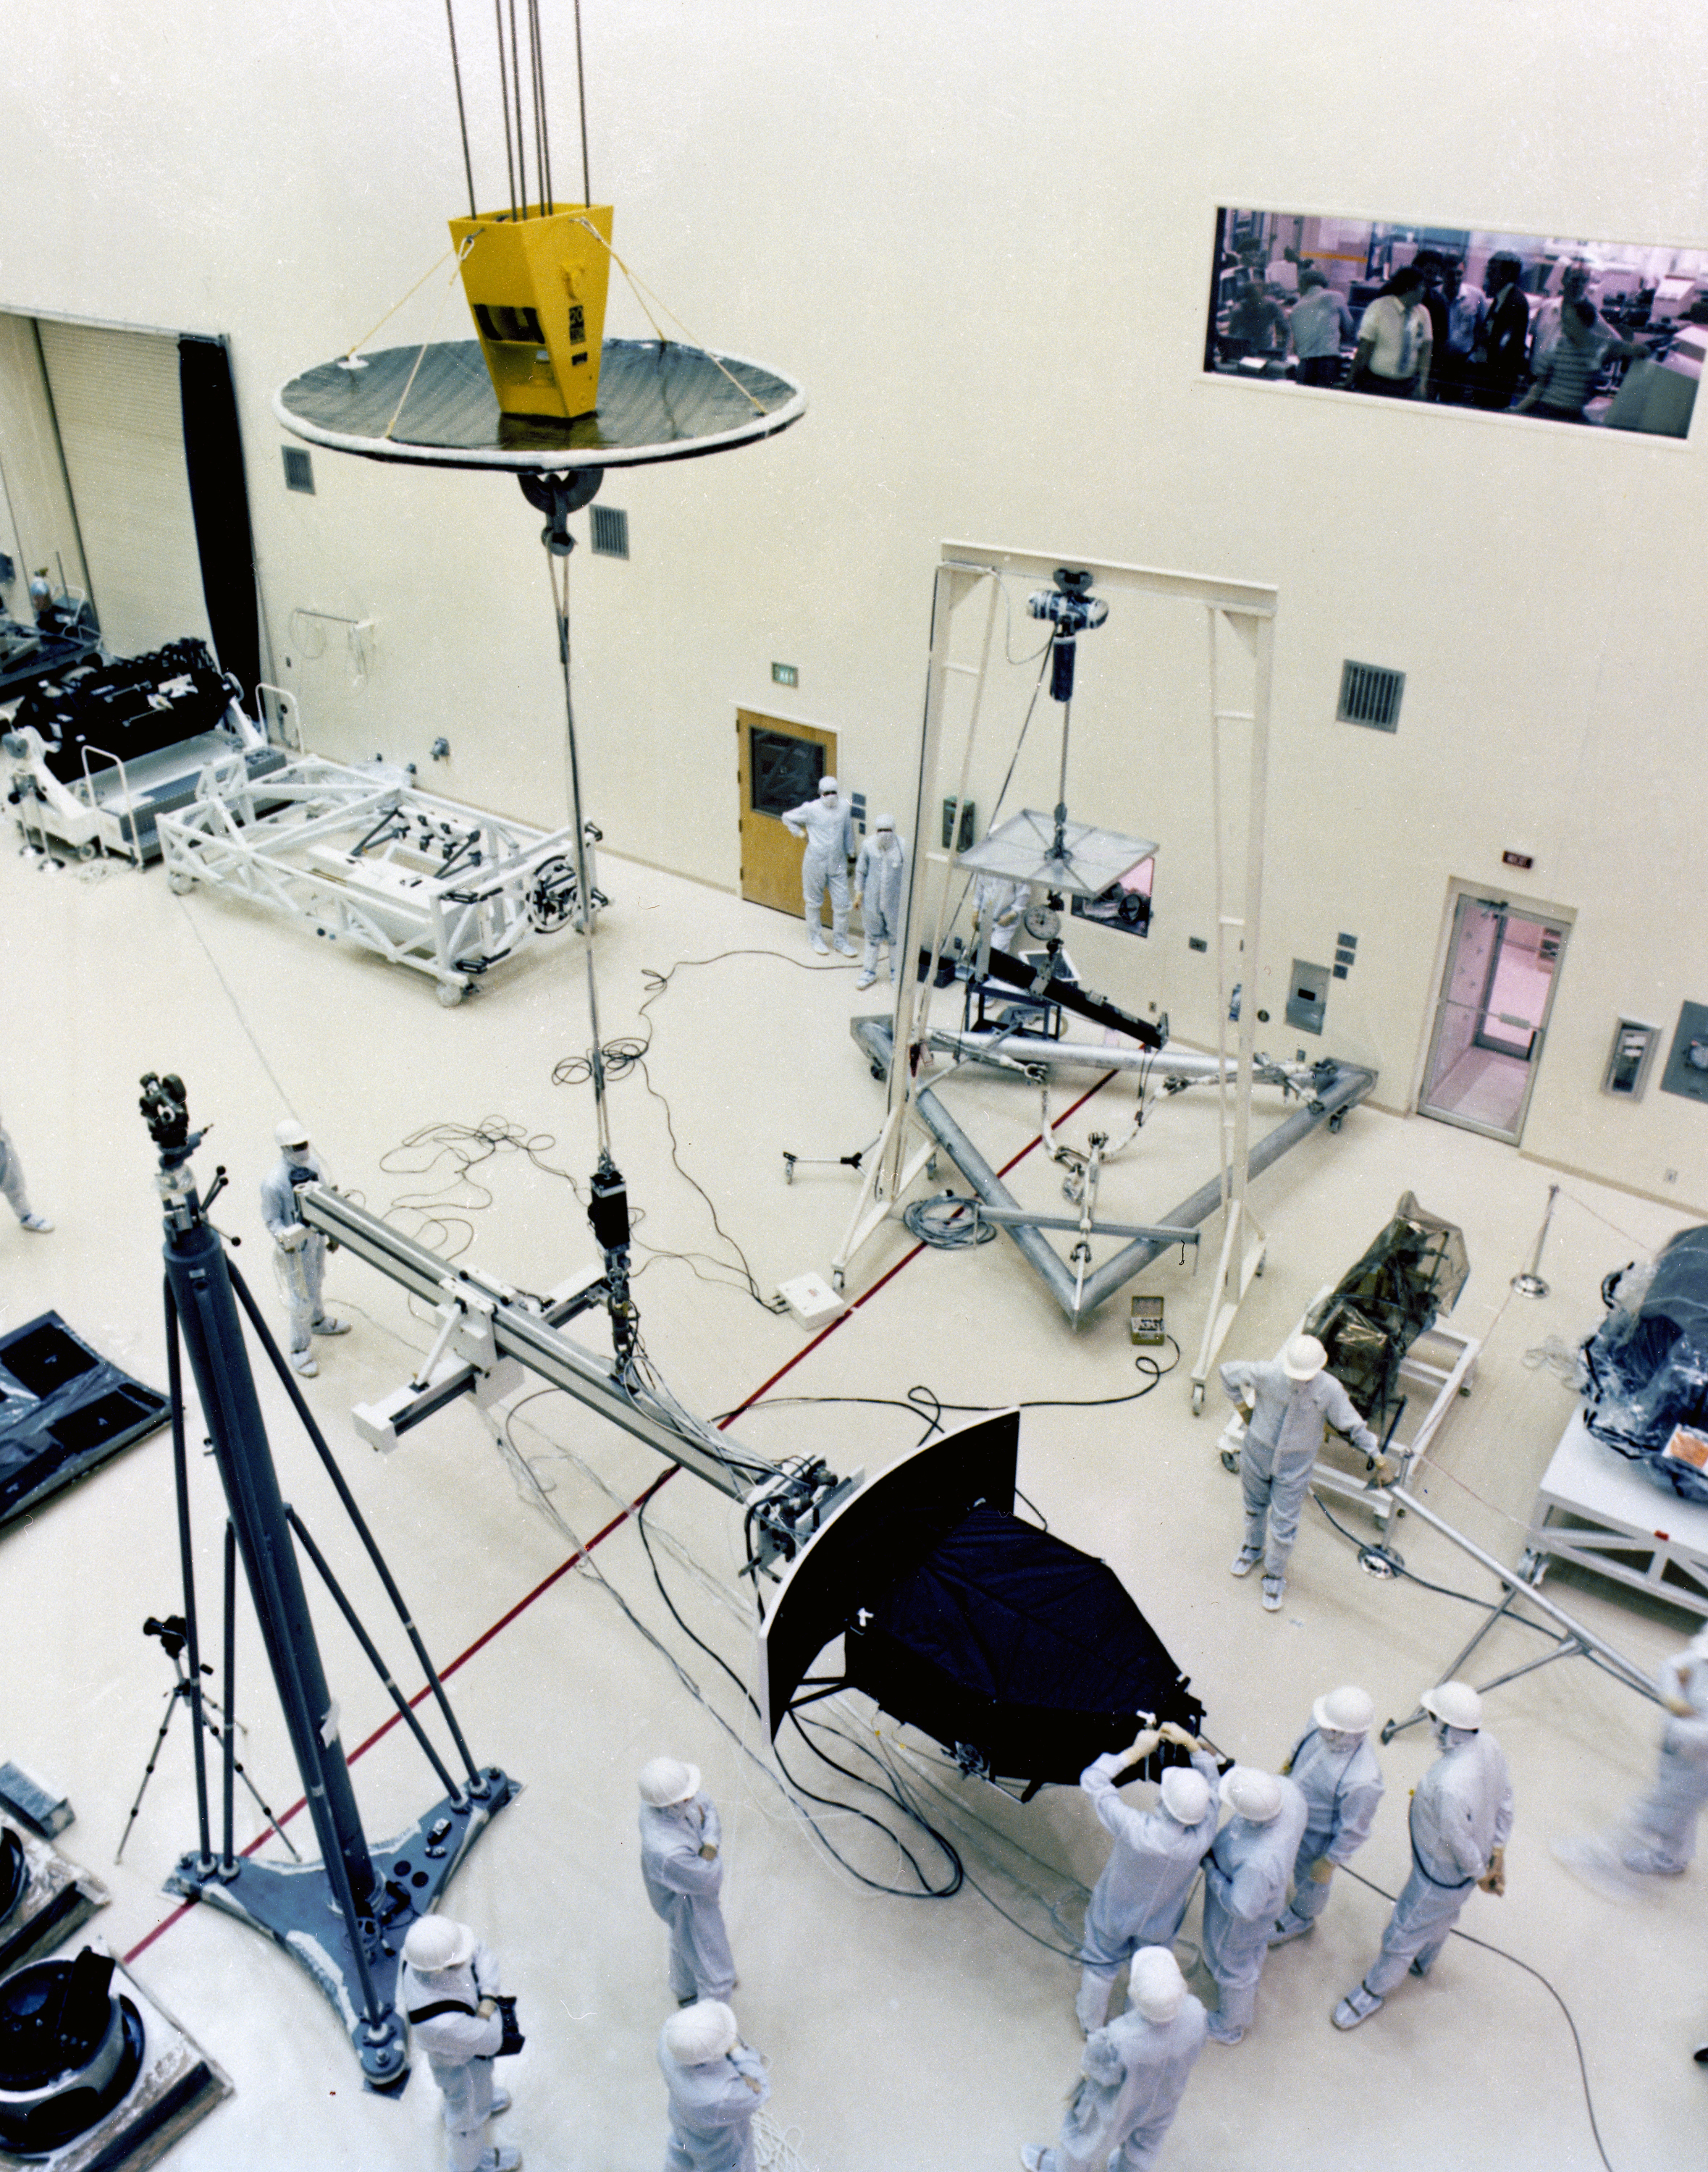 The Wide Field Planetray Camera is being lowered on a crane for installation in a clean room surrounded by engineers.